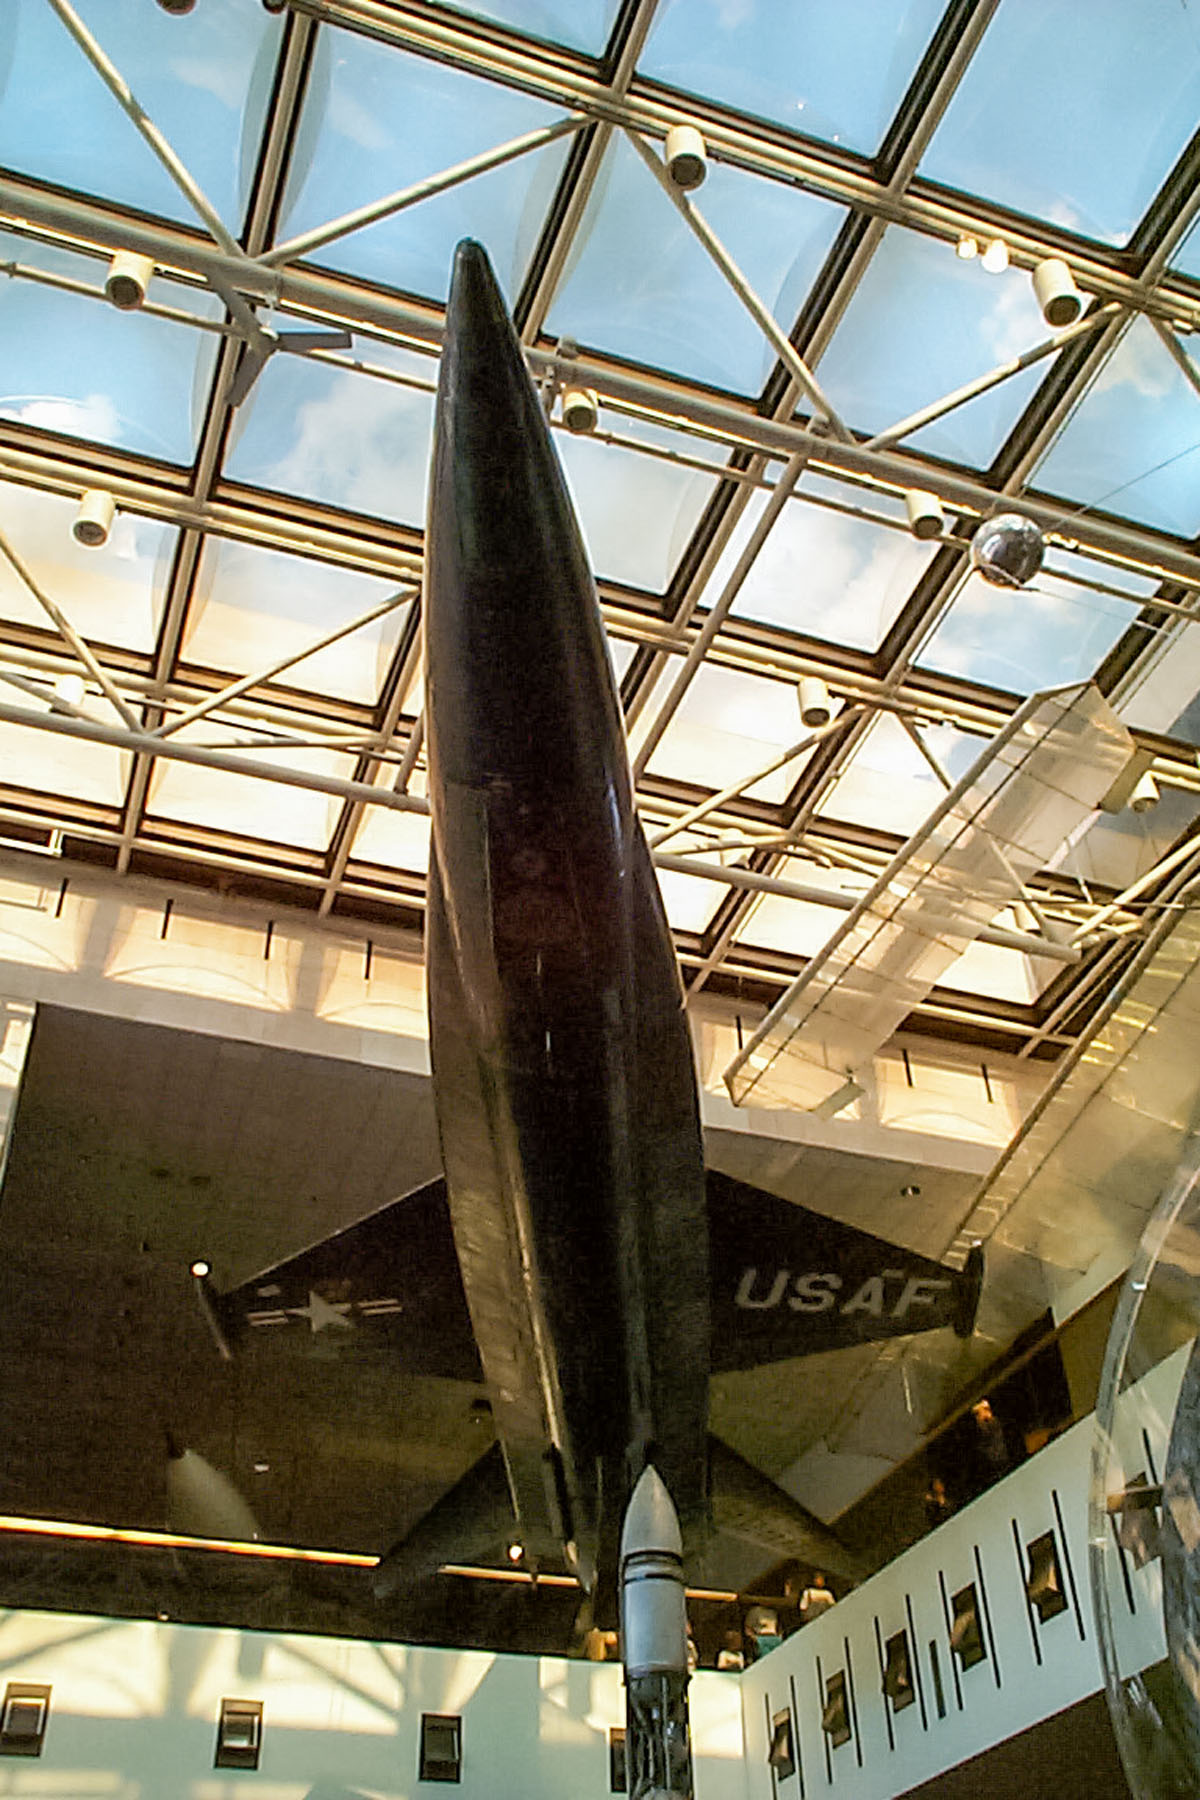 X-15 Mach 6 rocket plane, National Air and Space Museum, Washington, DC.  Click for next photo.